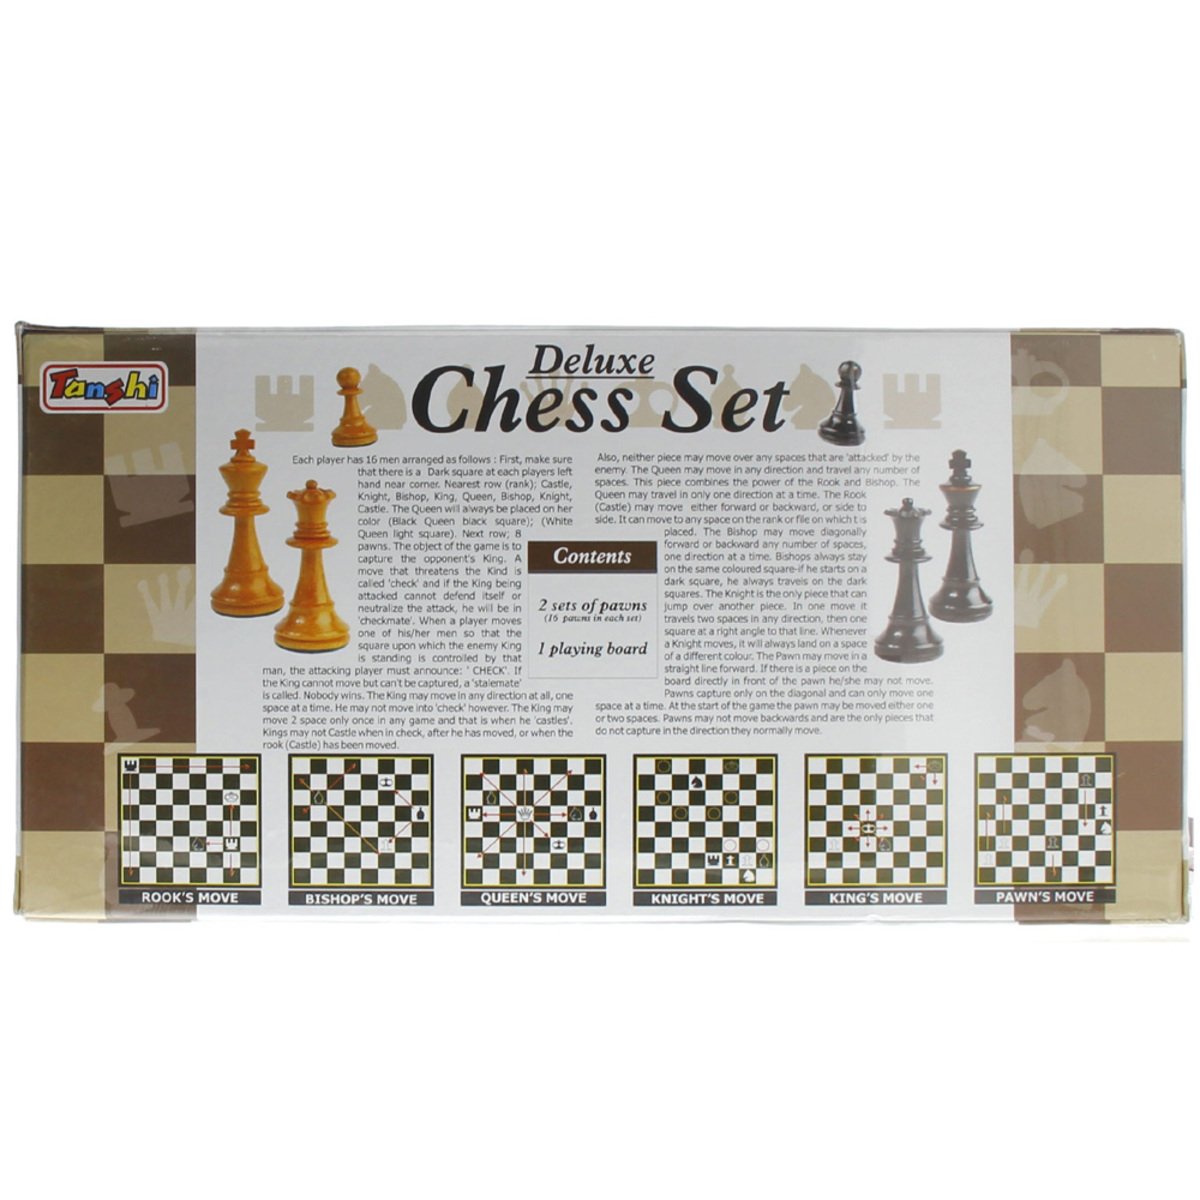 Tanshi Deluxe Chess Set